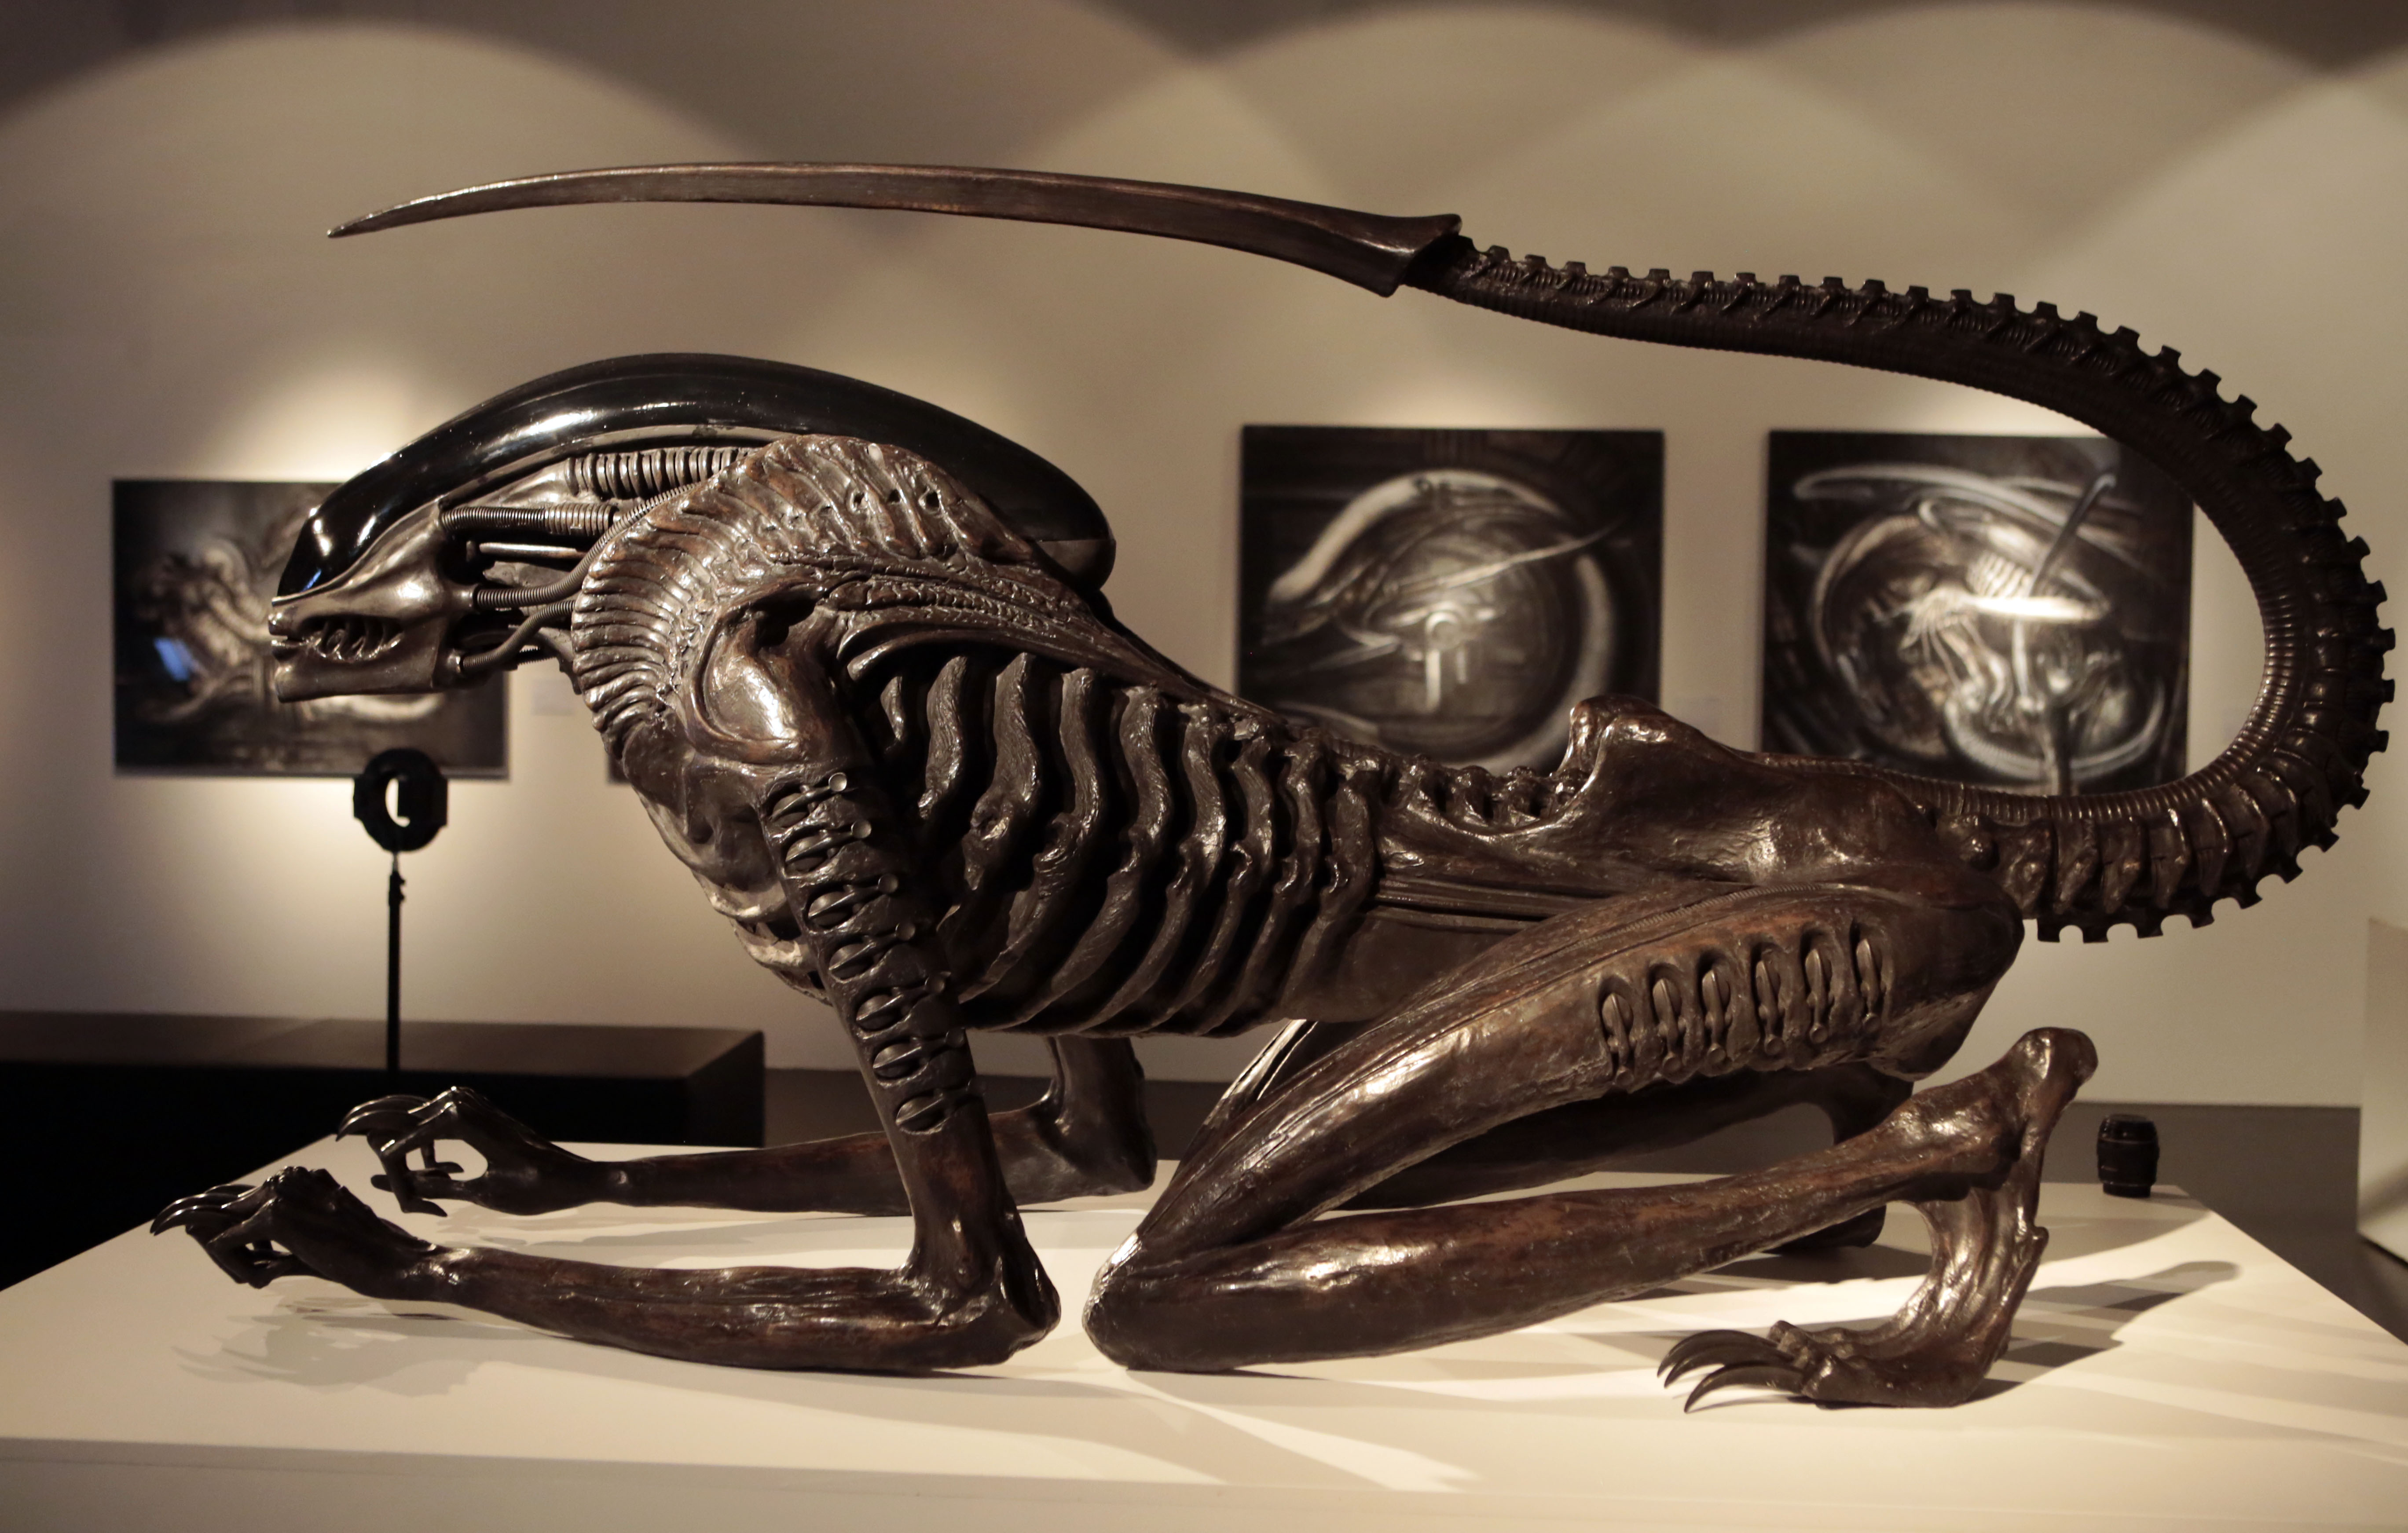 View at one of the sculptures by H.R. Giger during the opening of the Ars Electronica 2013 exhibition 'HR Giger.